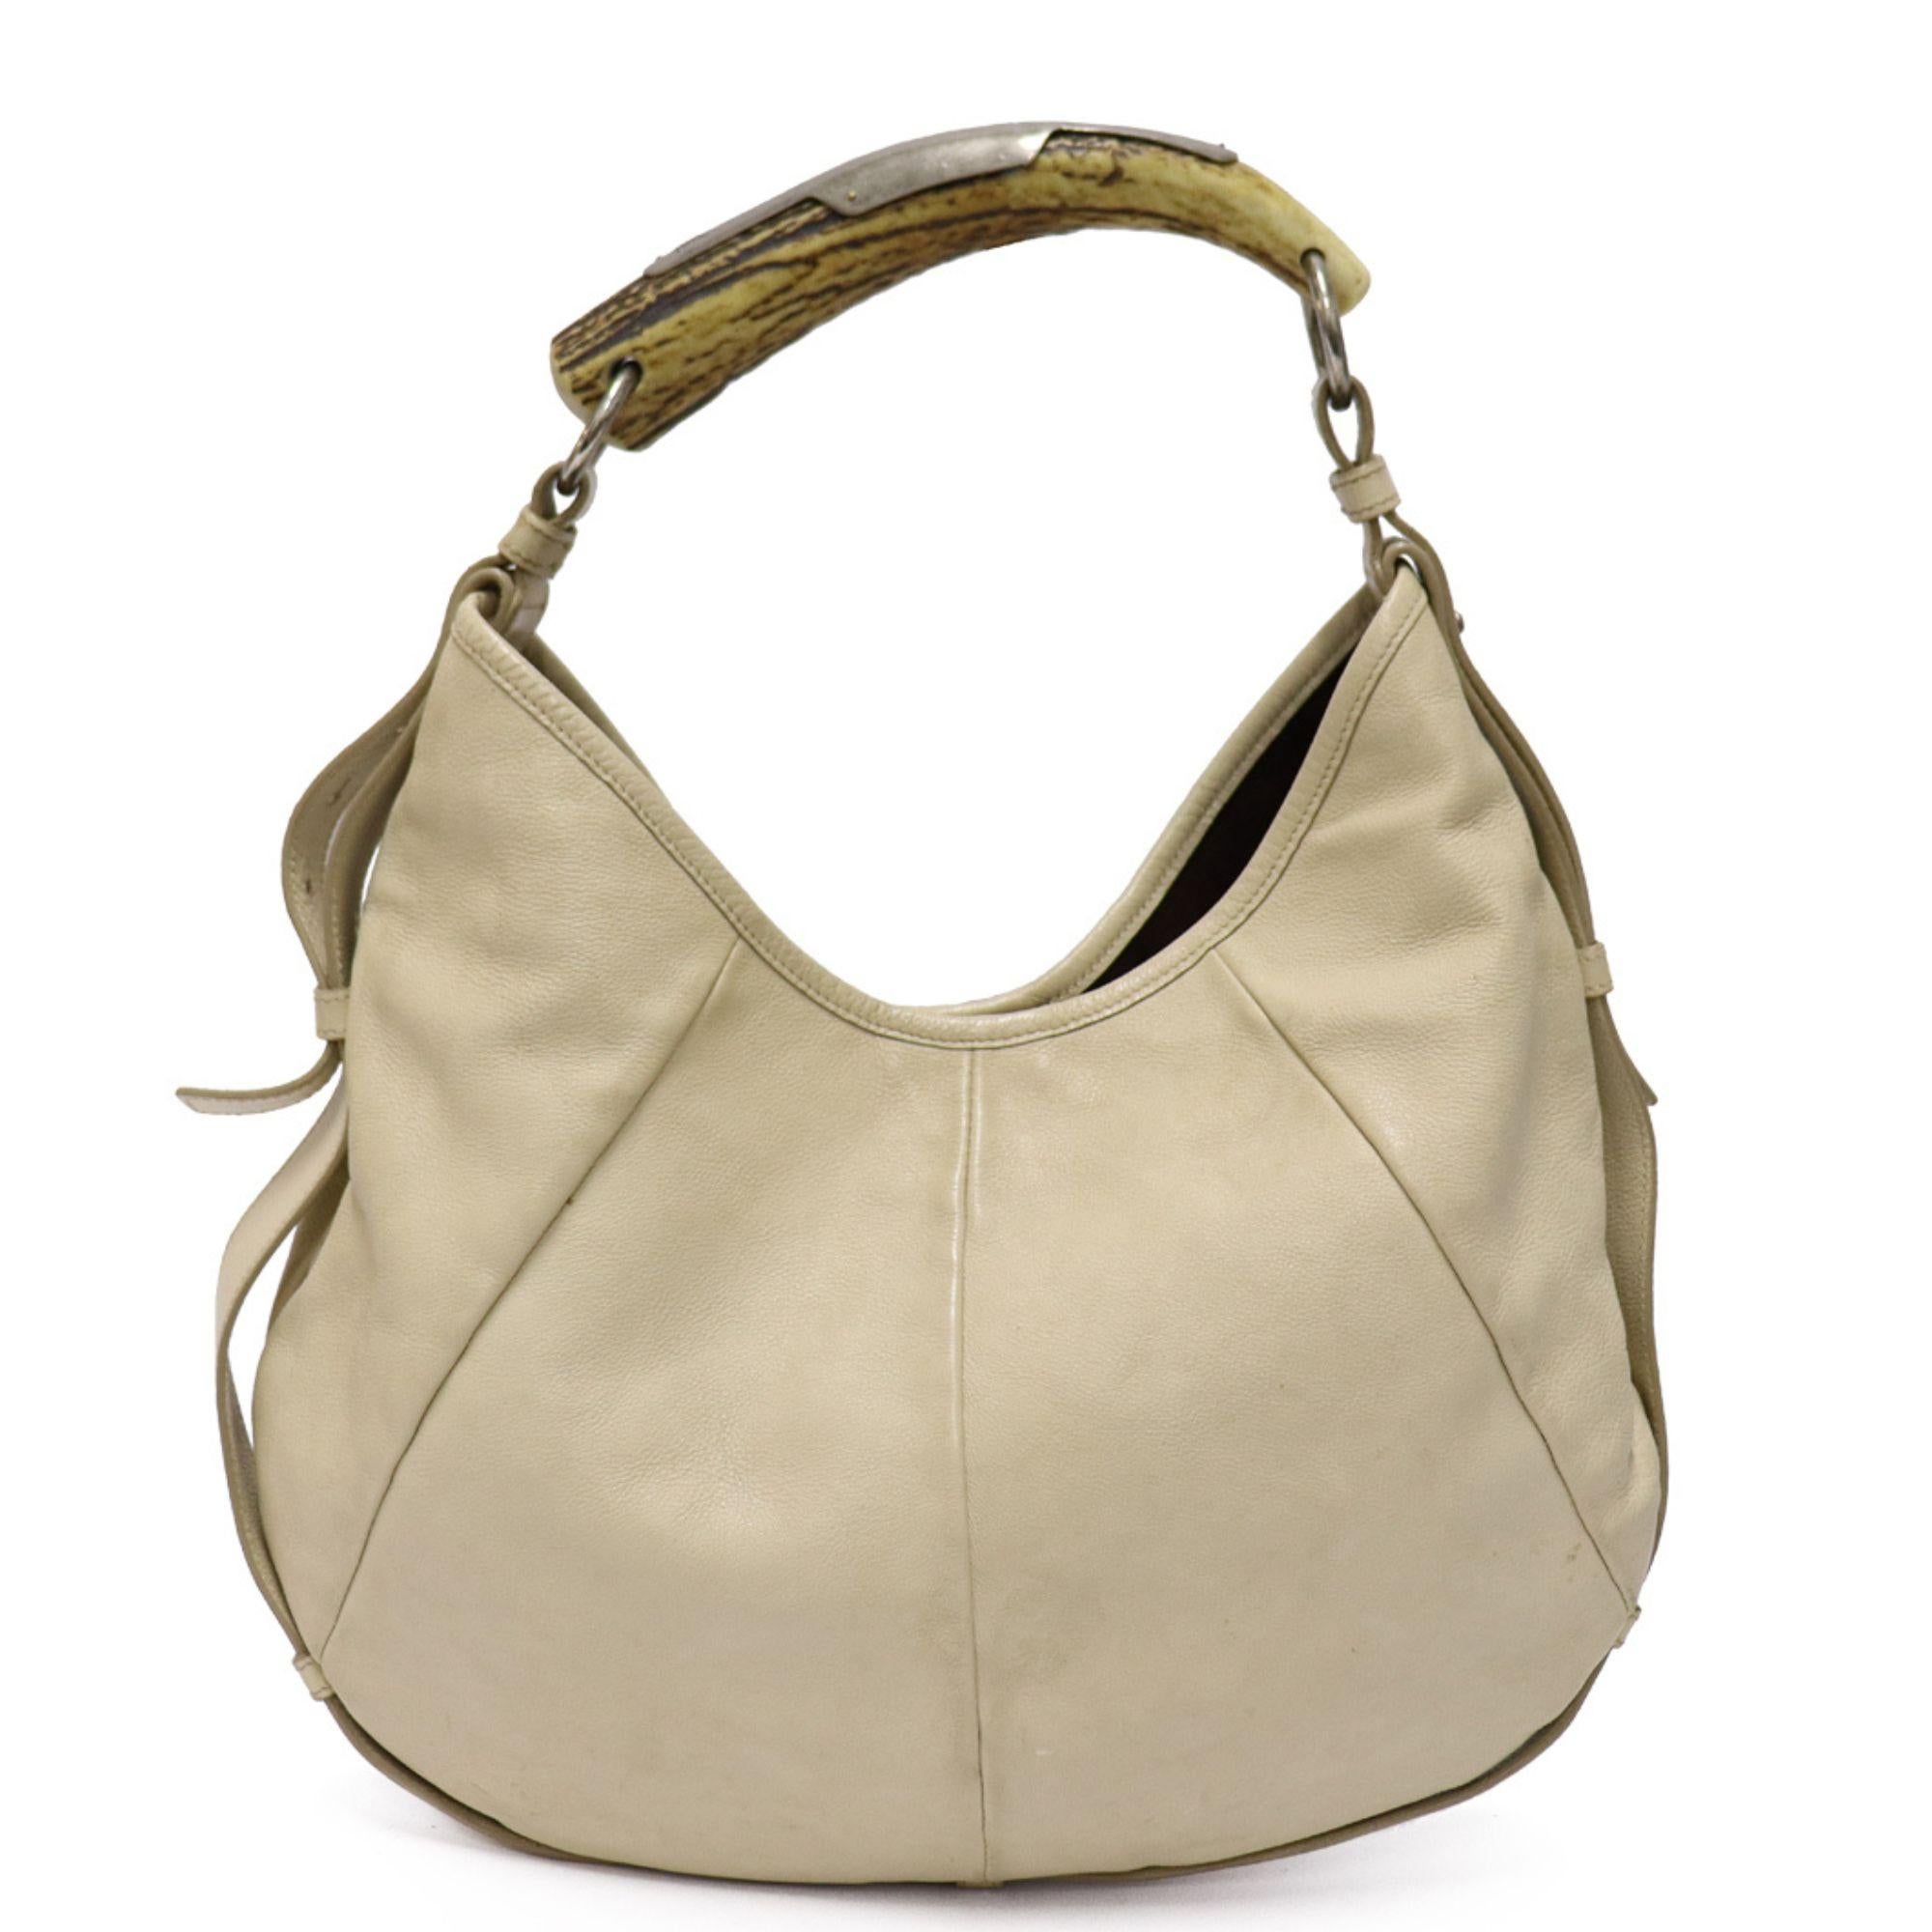 Designed by Tom Ford this bag features very soft and supple ivory leather. Features the iconic horn handle. Interior is spacious and contains one zipper compartment. Magnetic closure at top.

Measurements:
Height: 25cm
Width: 36cm
Depth: 2cm
Handle